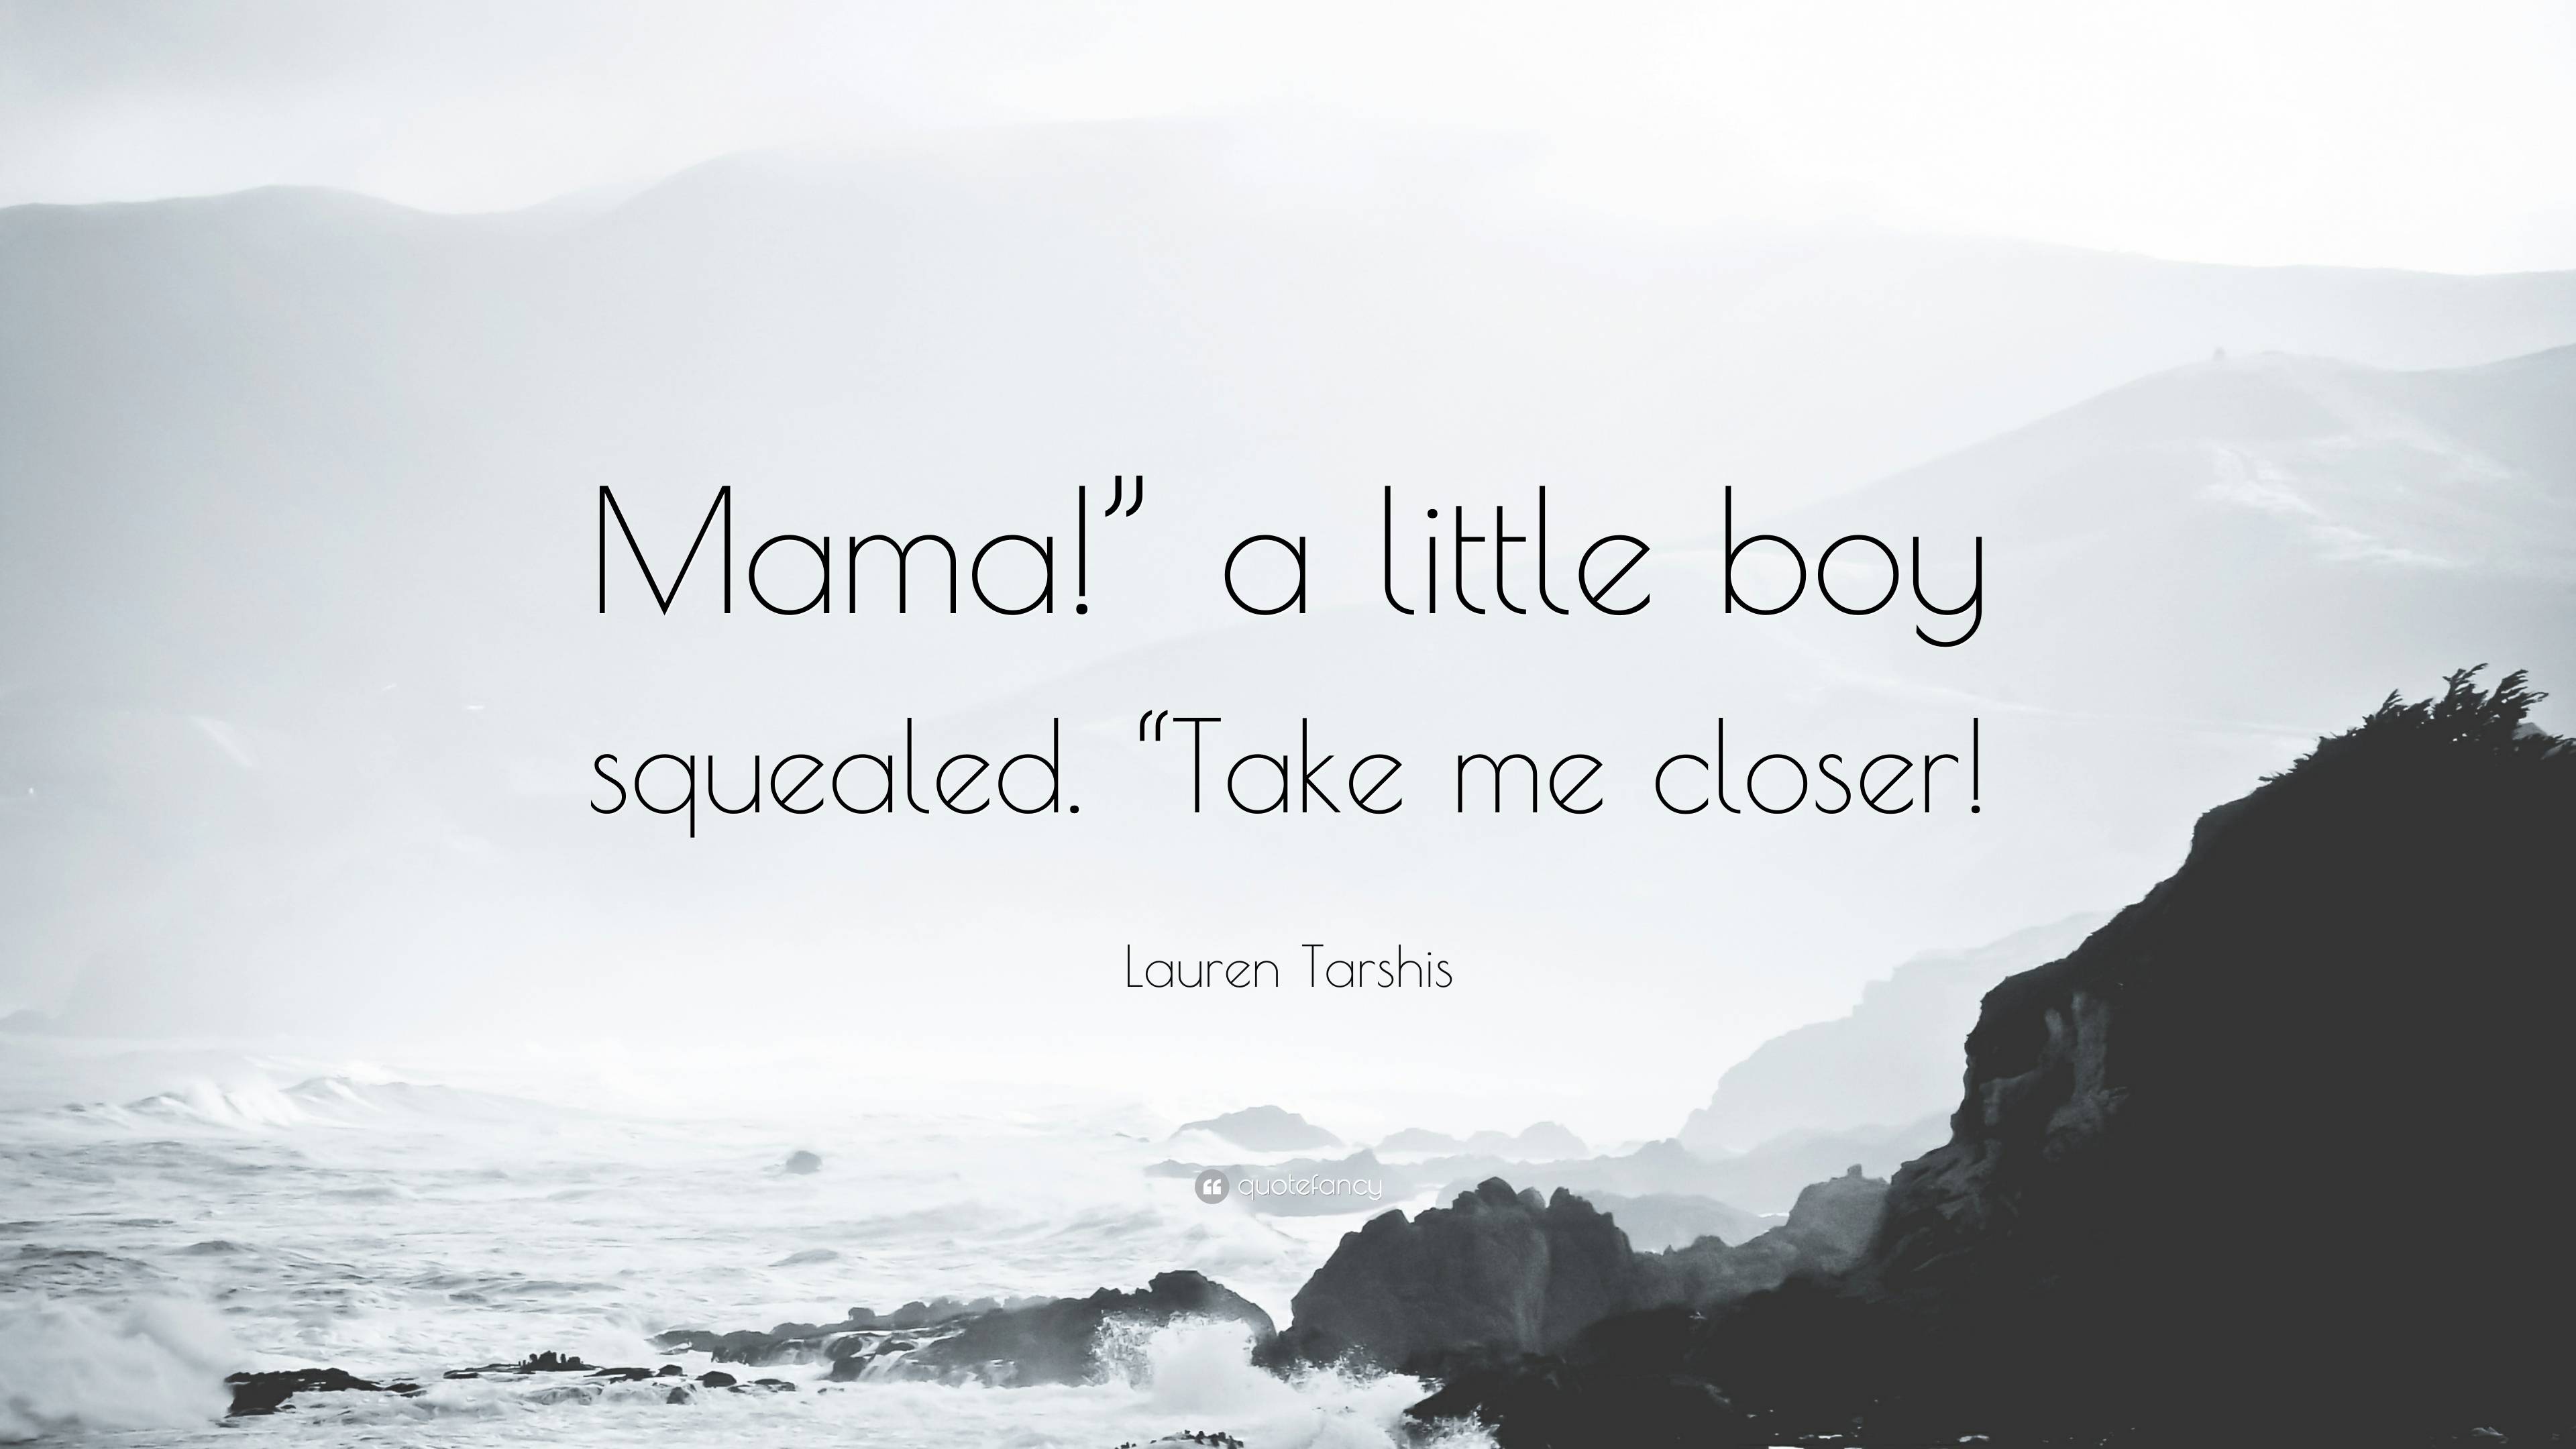 Lauren Tarshis Quote: “Mama!” a little boy squealed. “Take me closer!”